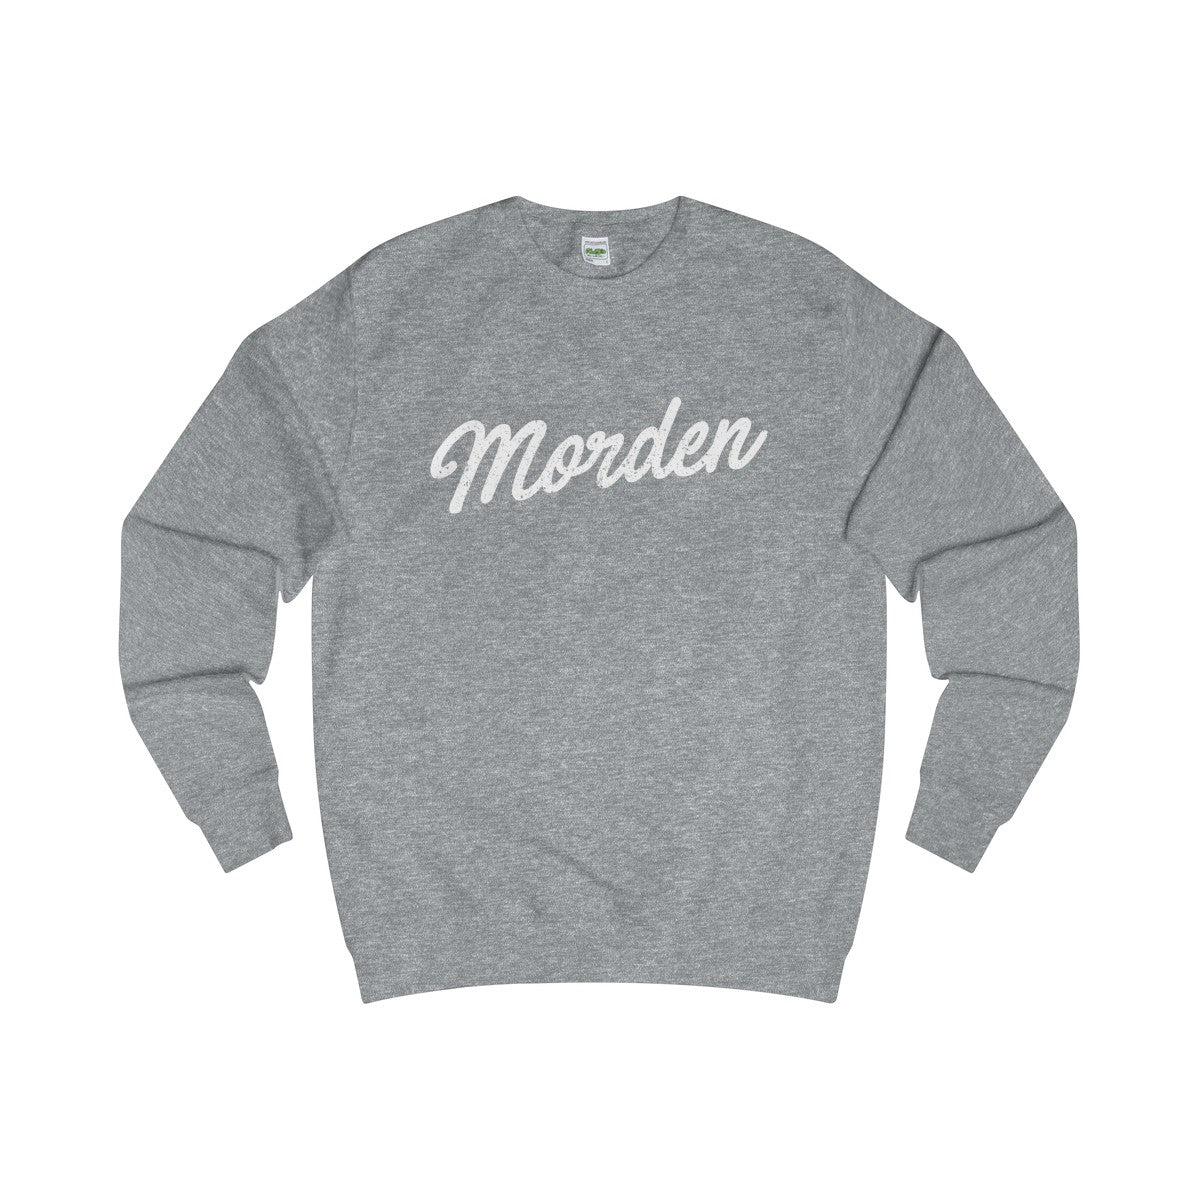 Morden Scripted Sweater